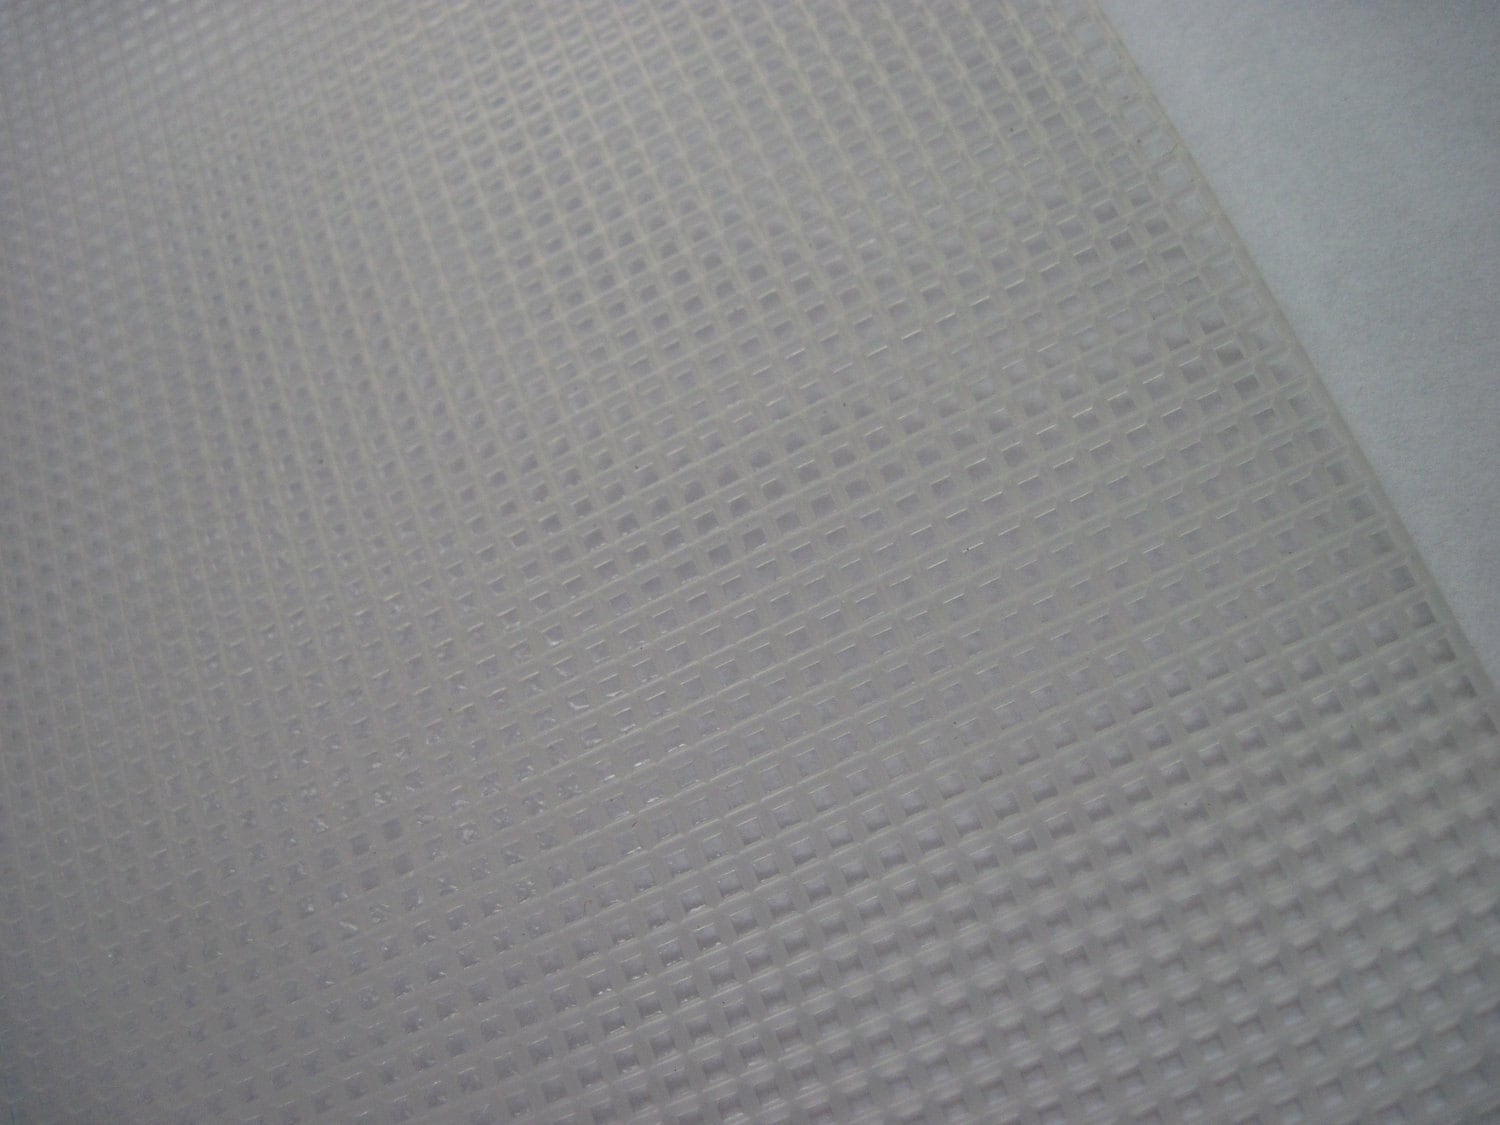 11 Count Plastic Canvas Grid, Ideal Plastic Mesh for Embroidery Projects  and Cross Stitch, Bag Making Supplies -  Norway